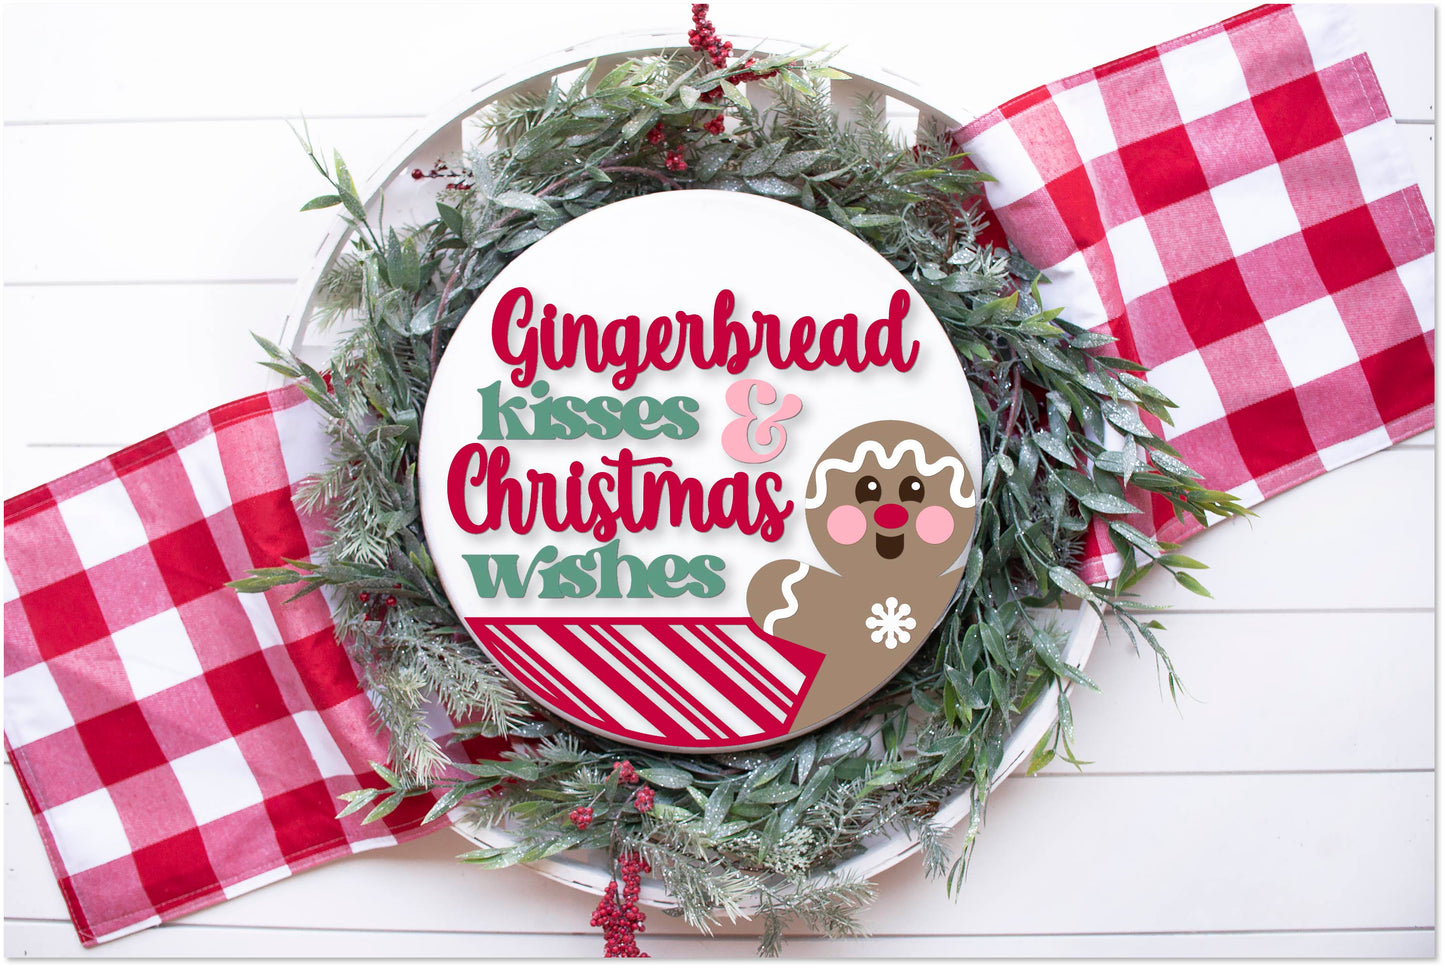 Gingerbread kisses and Christmas wishes sign